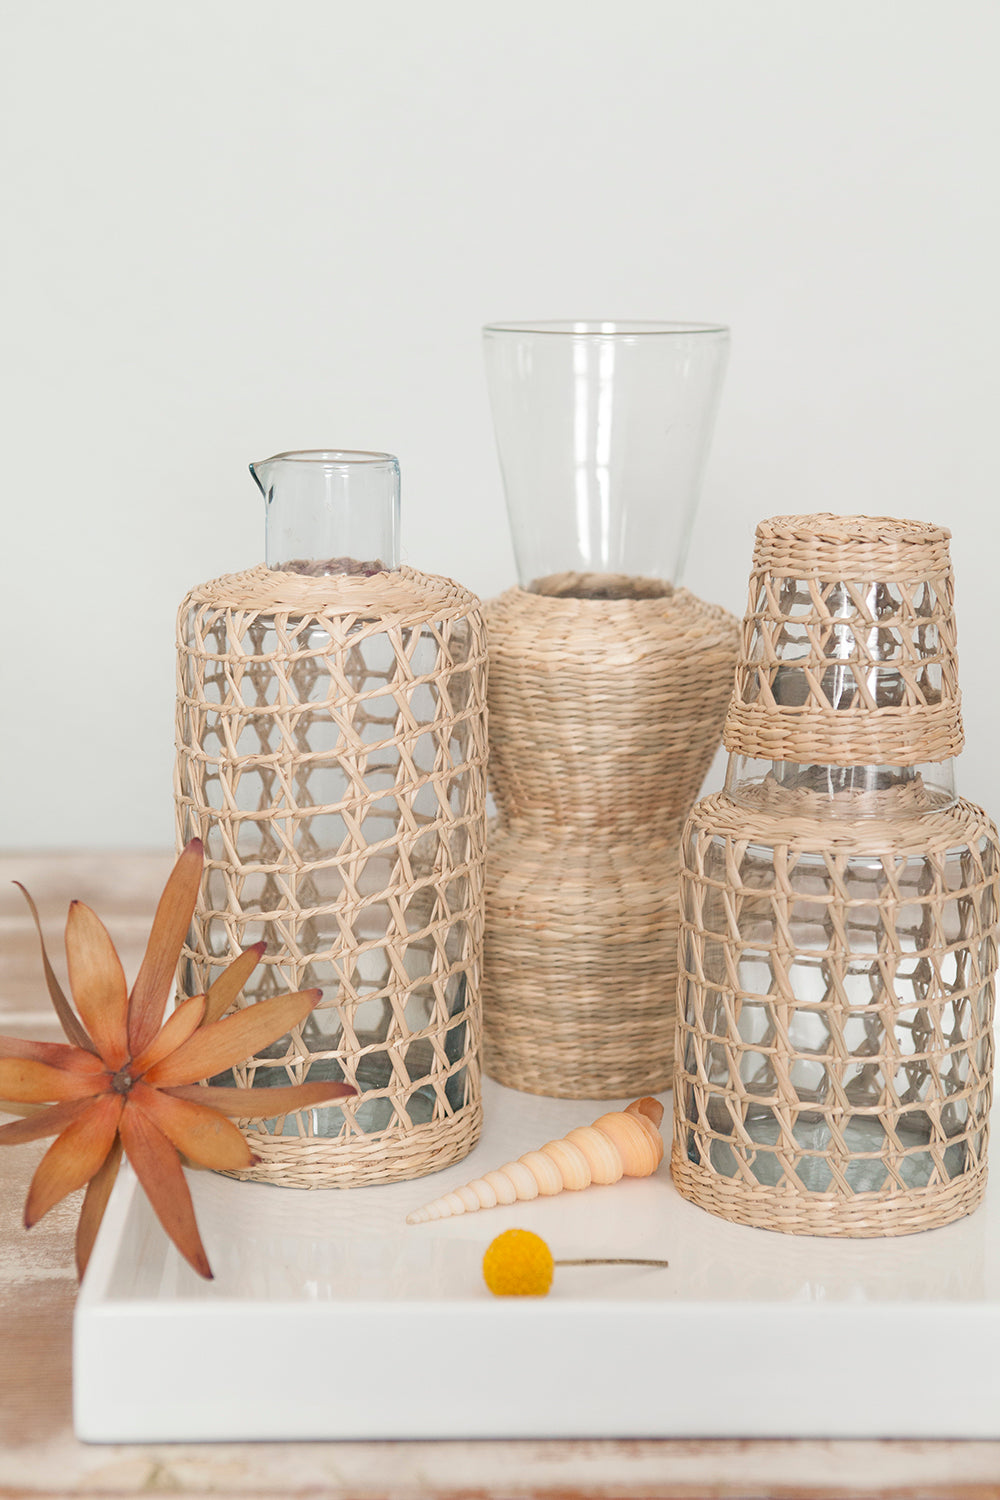 Seagrass Cage Wide Tumbler Glass Seagrass Brand_Seagrass & Rattan Champagne Flutes Cocktail Kitchen_Drinkware LookBook_0067_resize_2a78588a-dbe8-413c-b358-69c9b0233a36